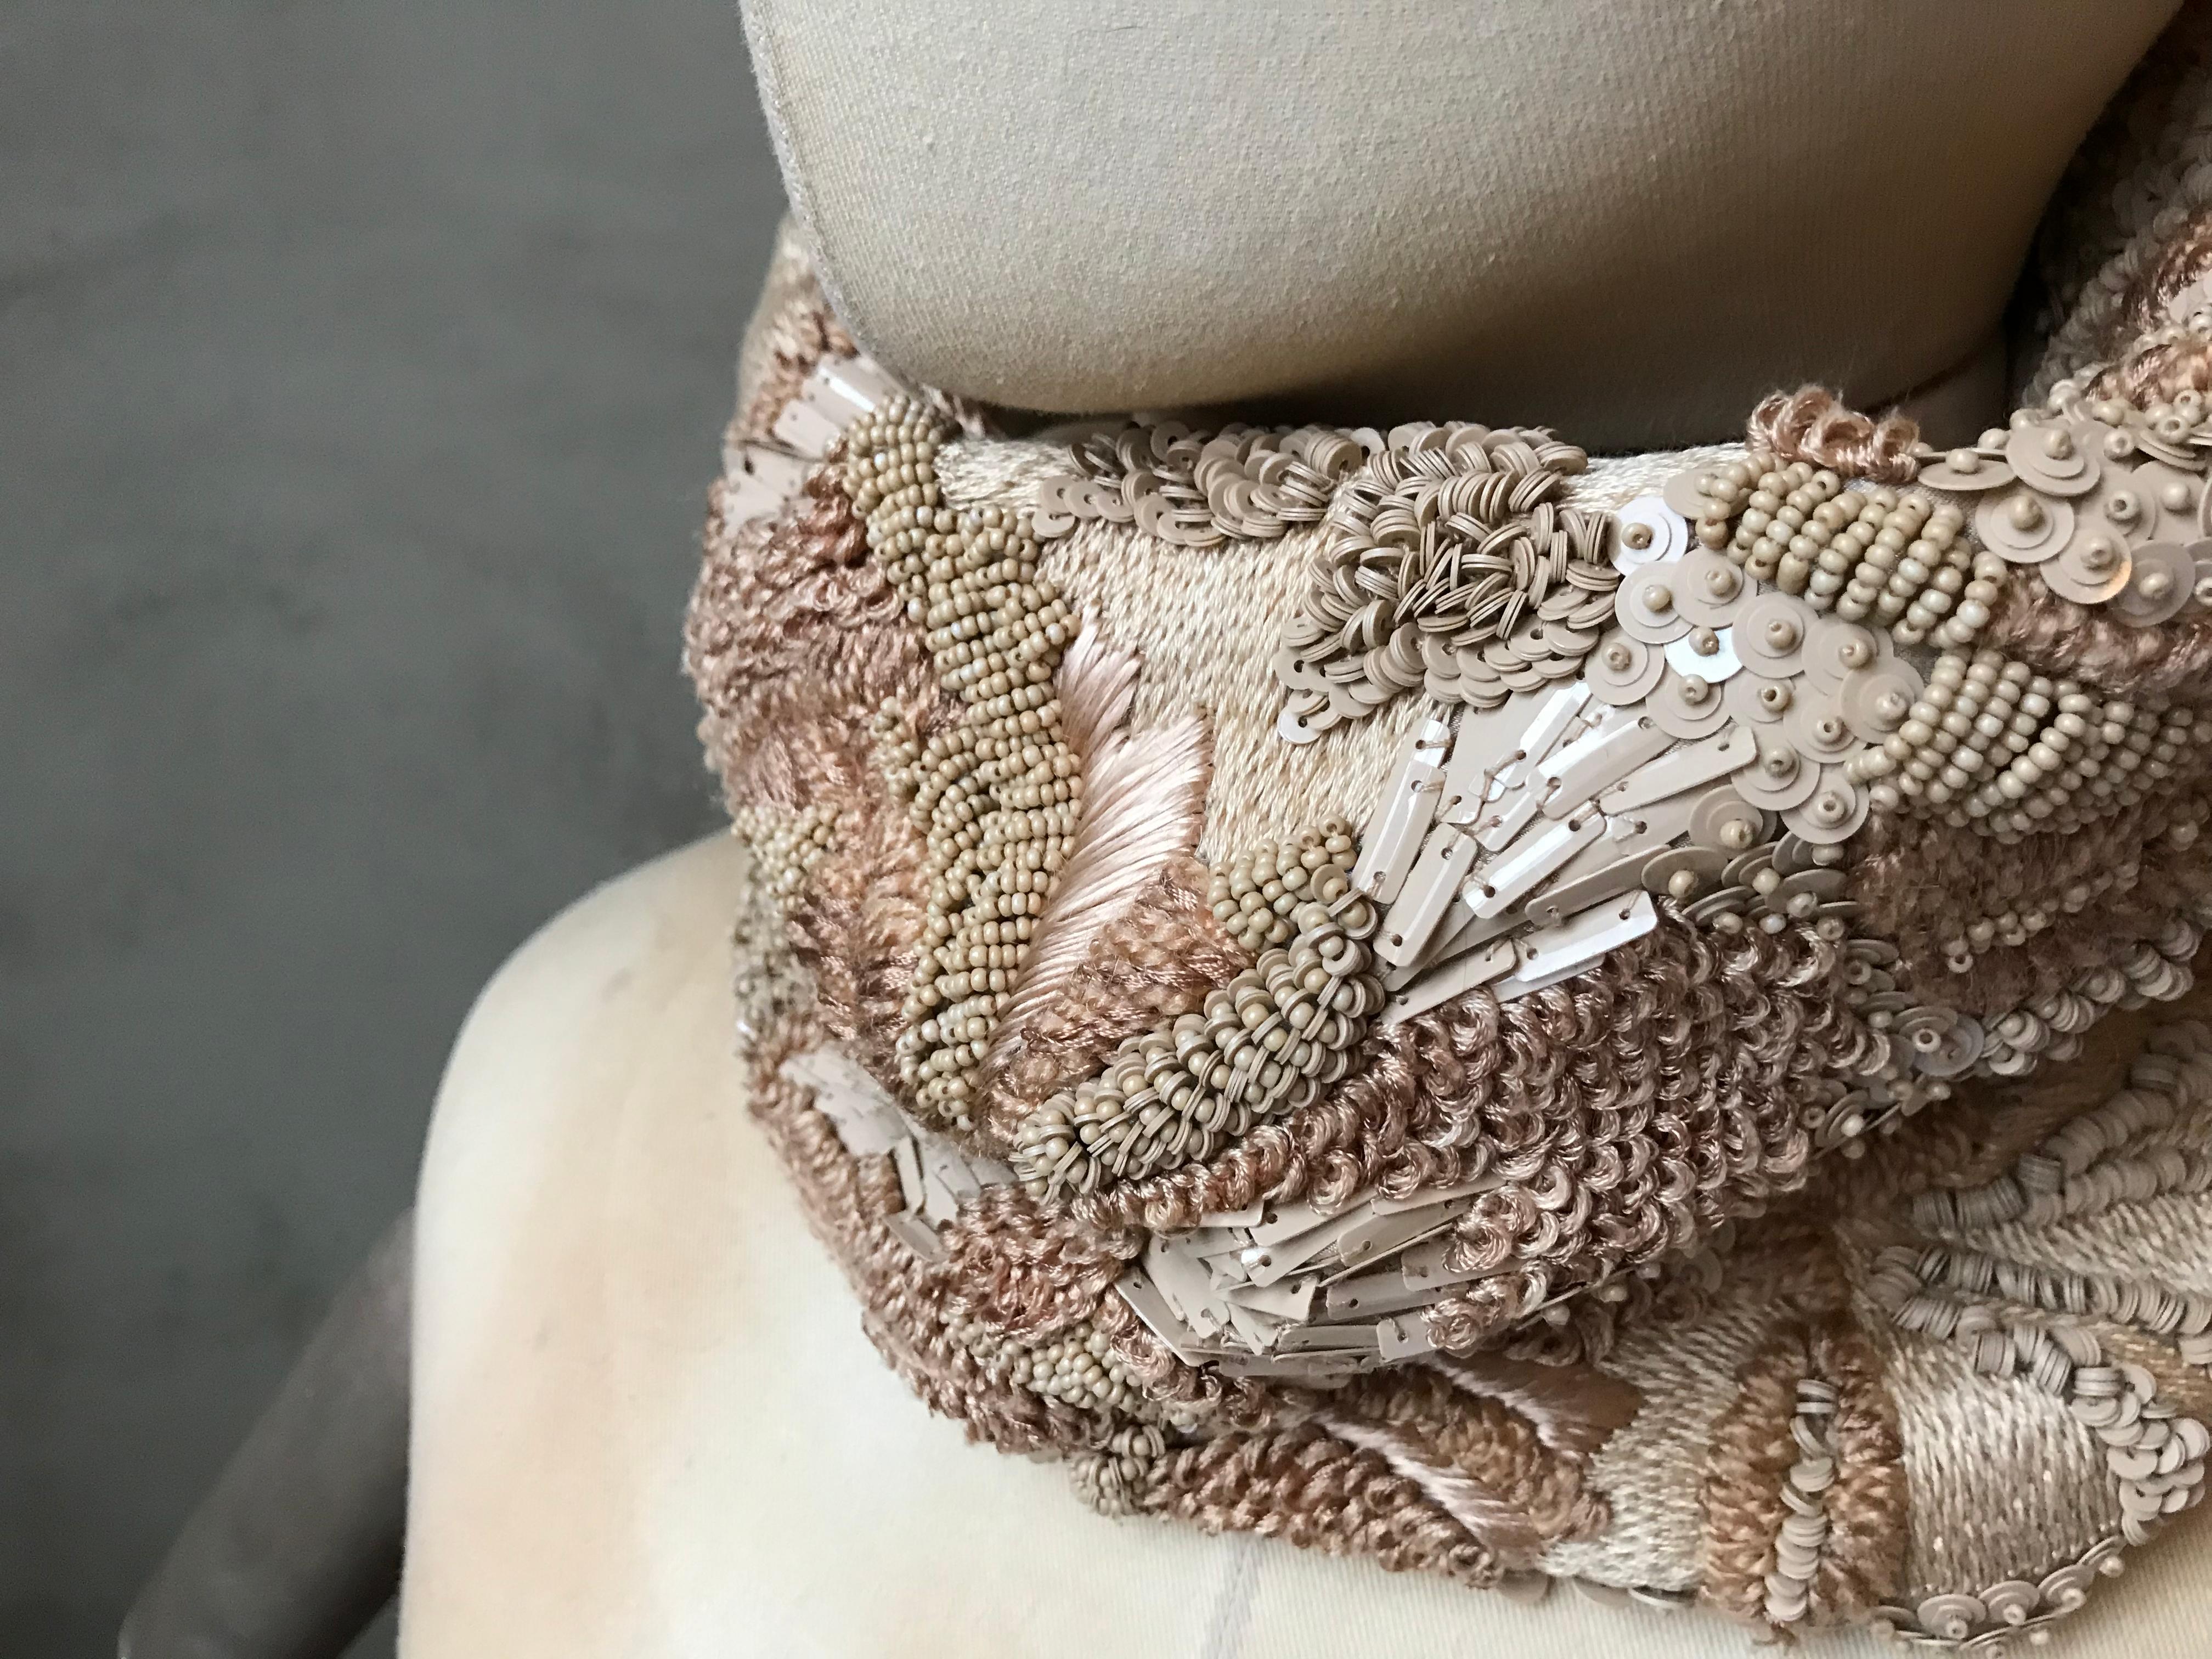 Dries Van Noten Hand Beaded and Embroidered Collar 2